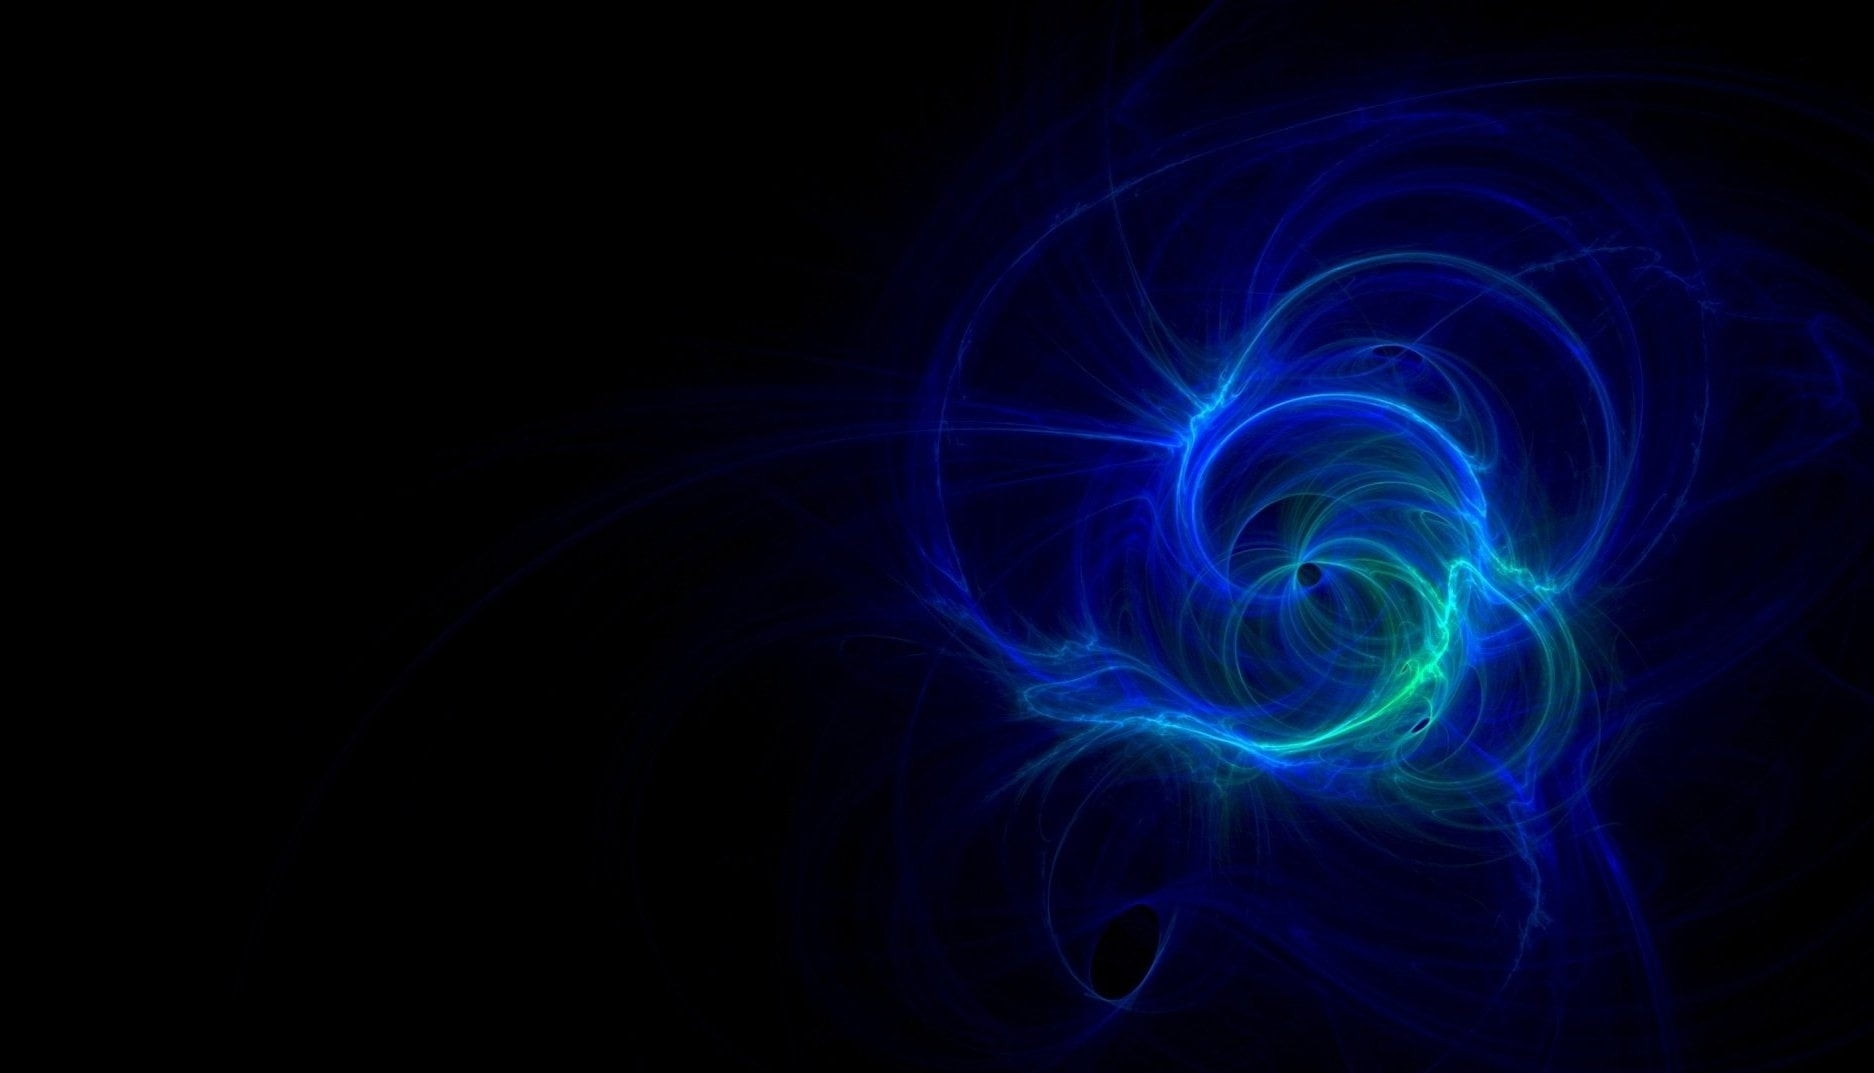 blue and green wave wallpaper, clot, smoke, neon, light, background